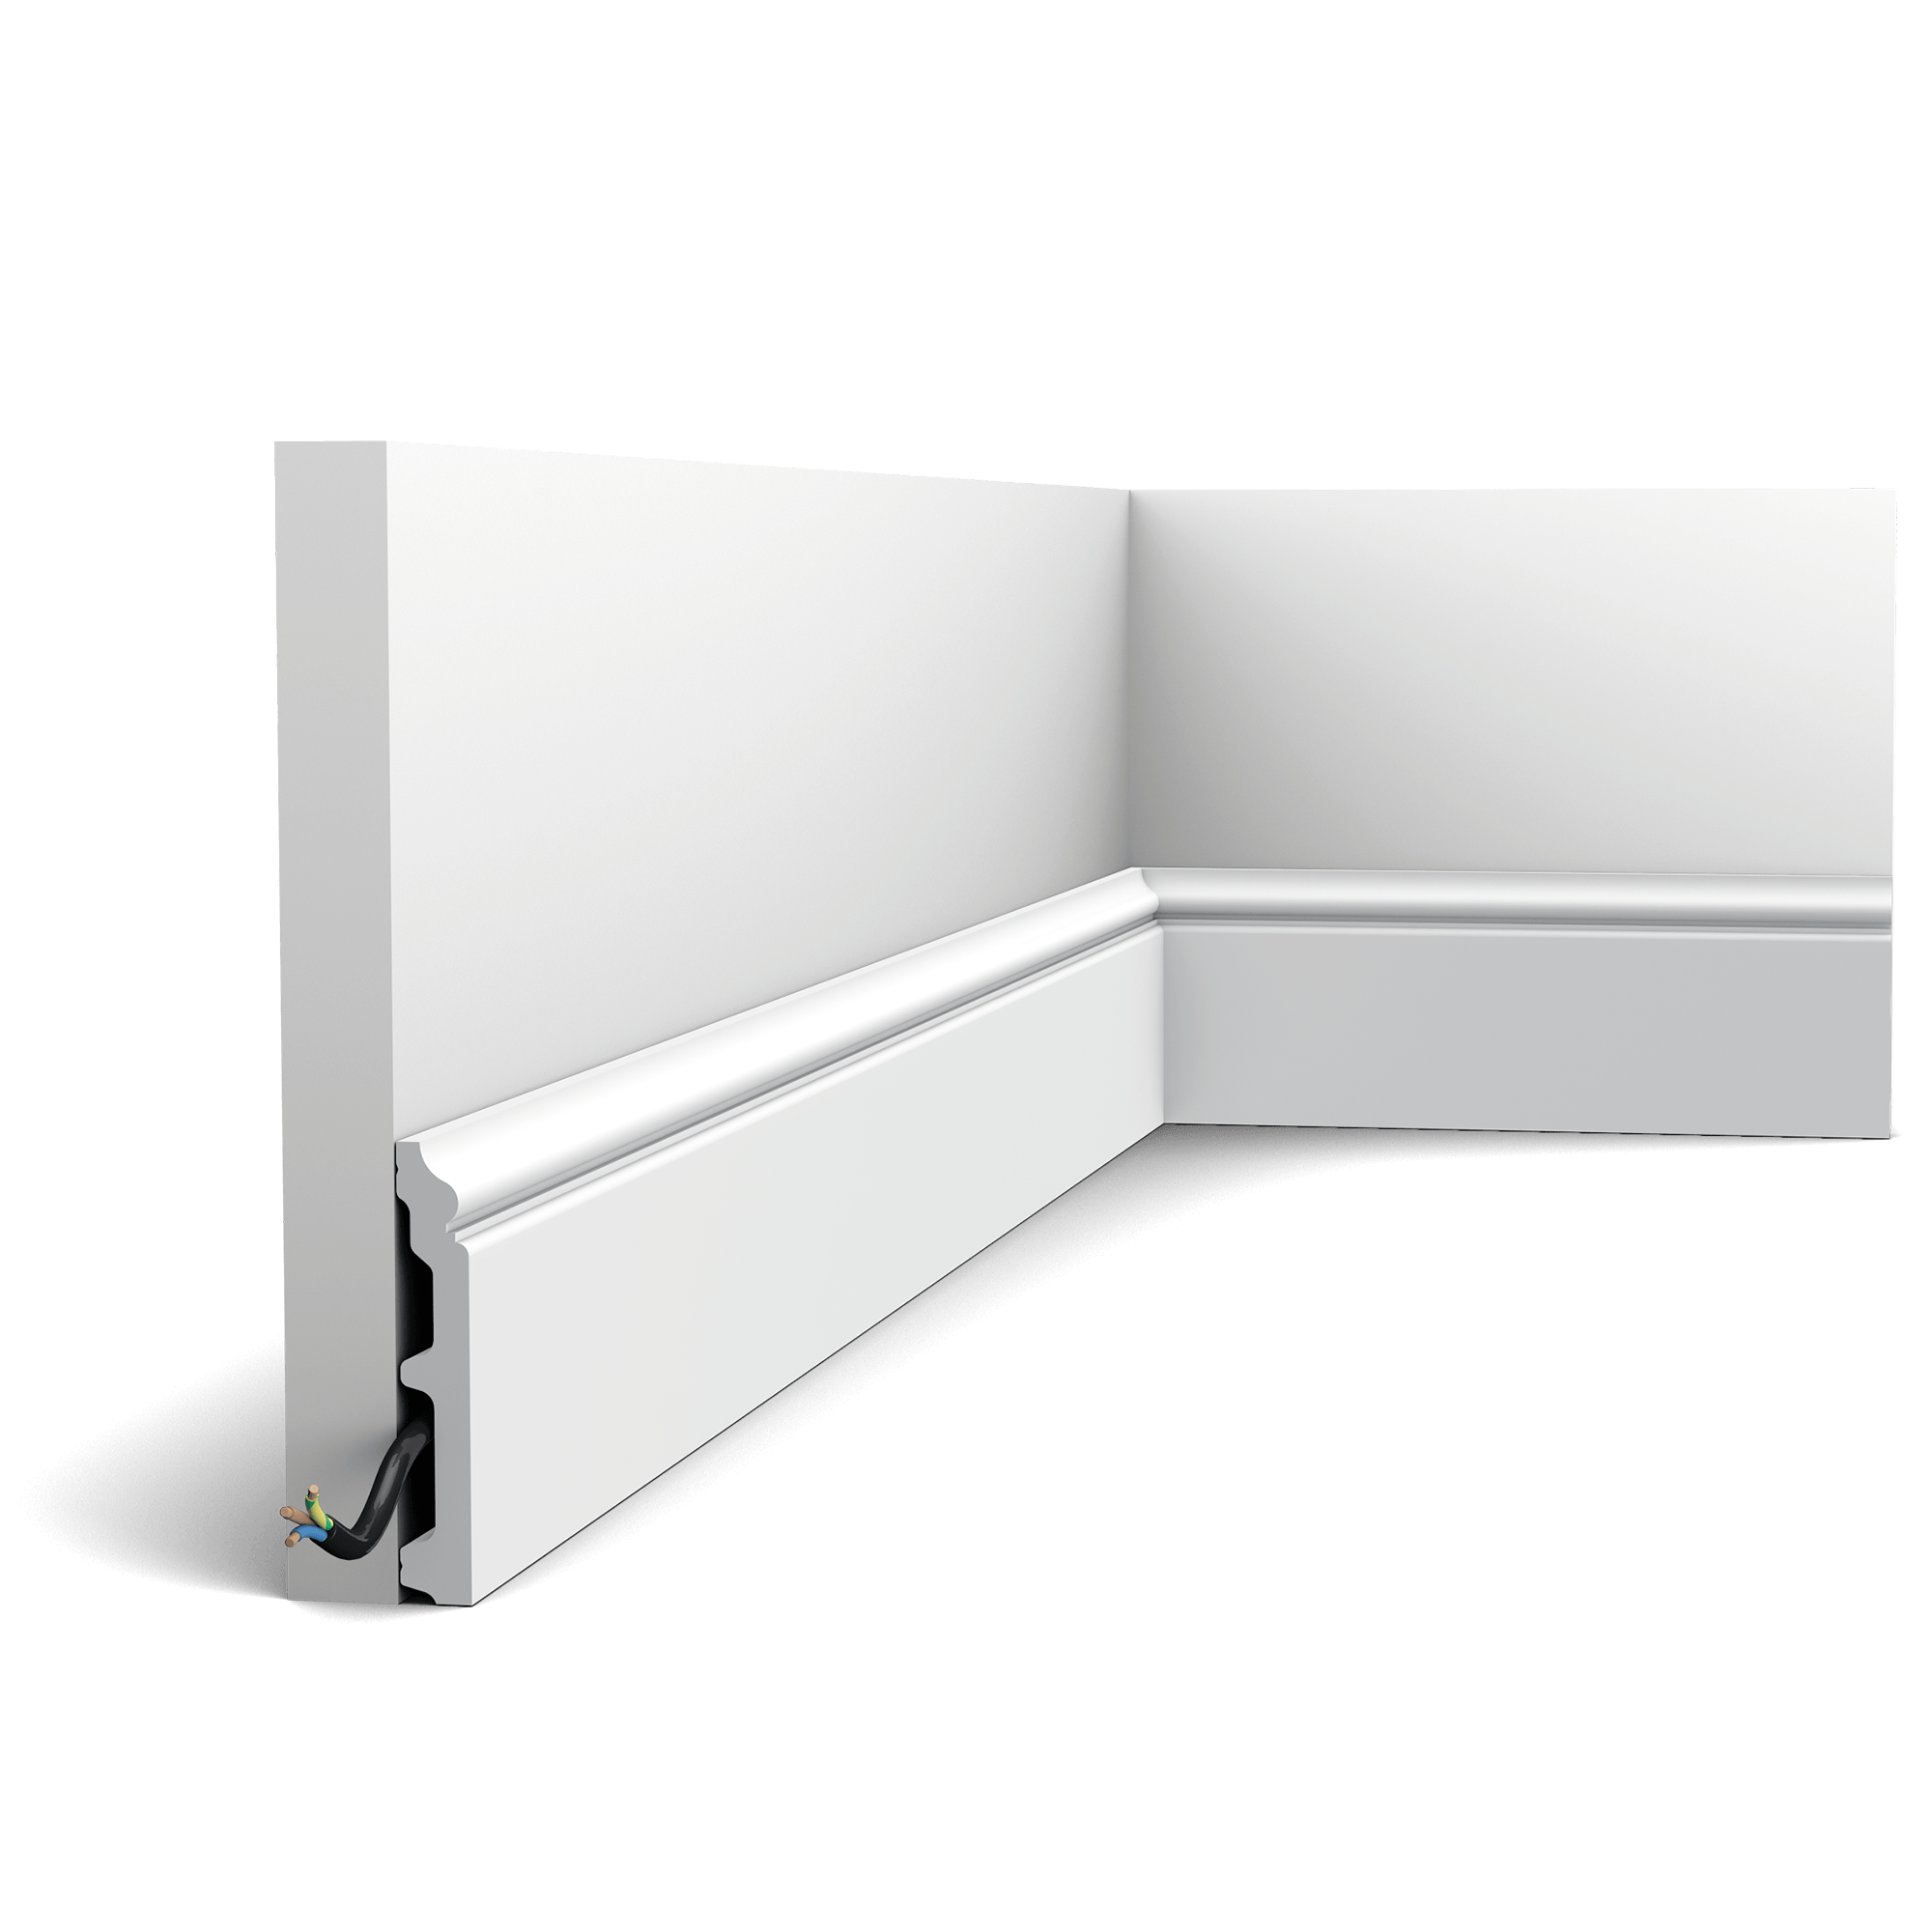 NEW - Product finished with RAL9003 Signal white. It is not necessary to repaint this profile after installation. Elegant, classic skirting board from the CONTOUR family which combines a minimalist design with gentle curlicues.